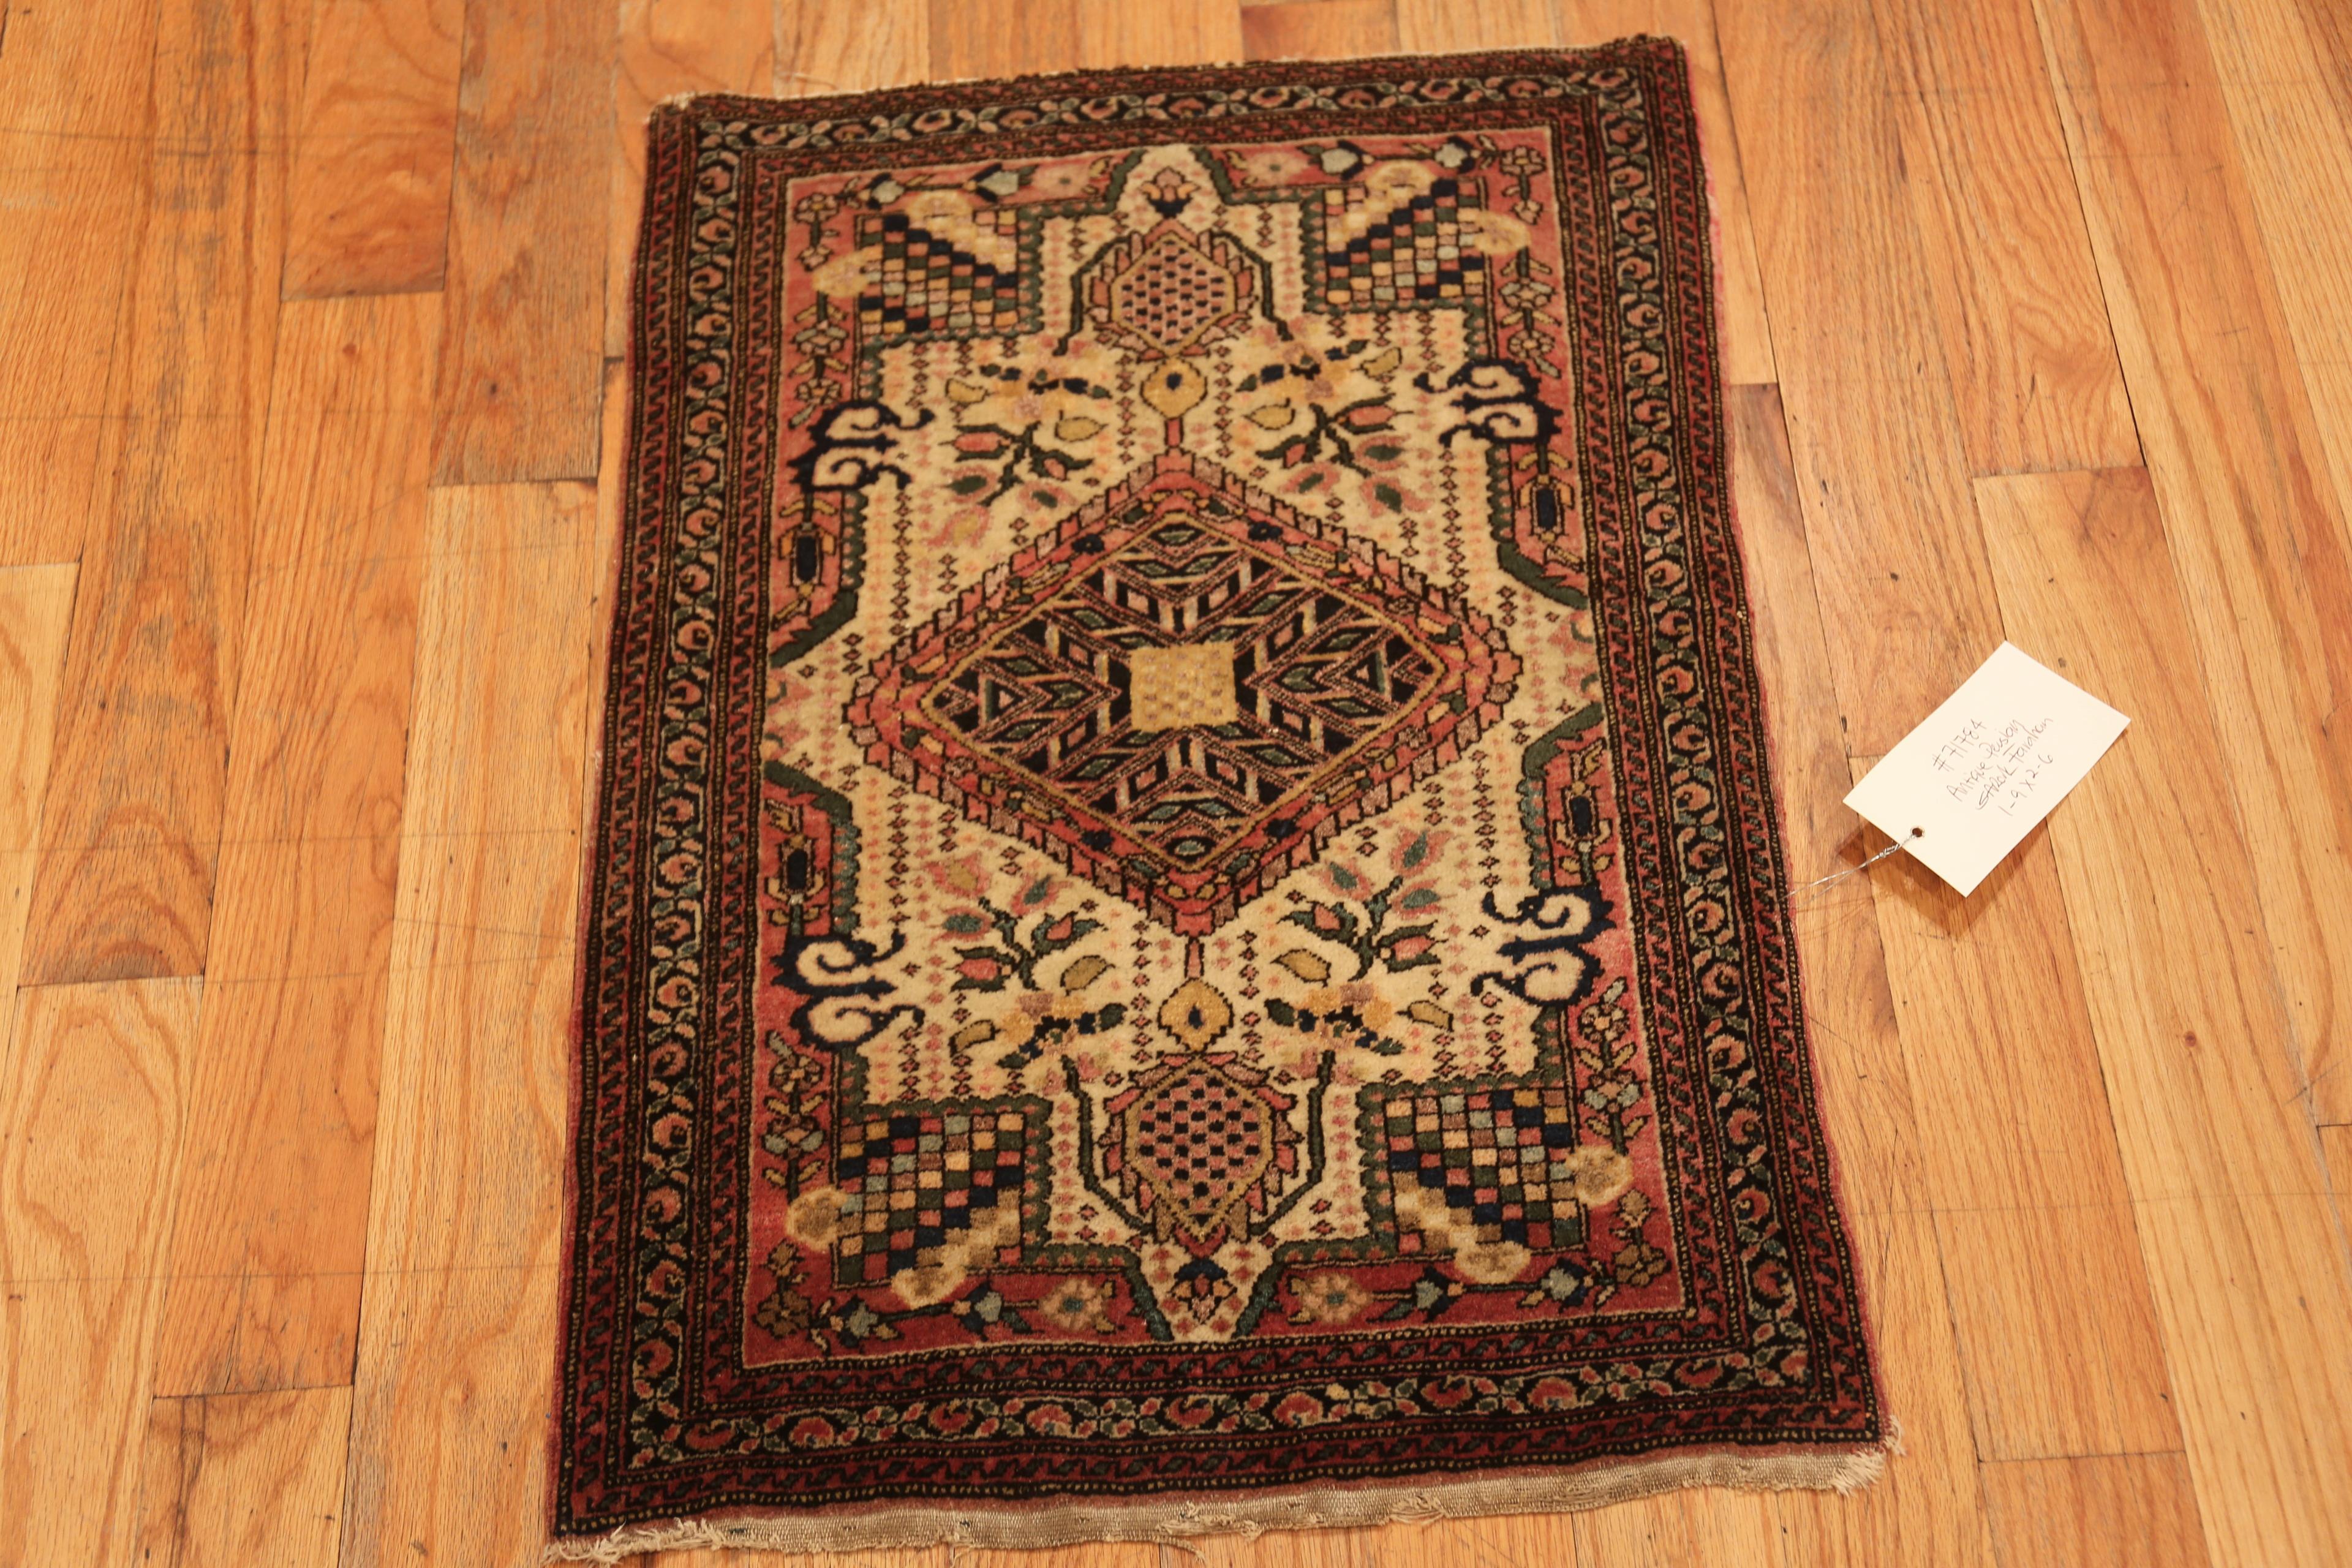 Small Size Antique Persian Sarouk Farahan Rug, Country of origin: Persian rug, Circa date: 1900. Size: 1 ft 9 in x 2 ft 6 in (0.53 m x 0.76 m)